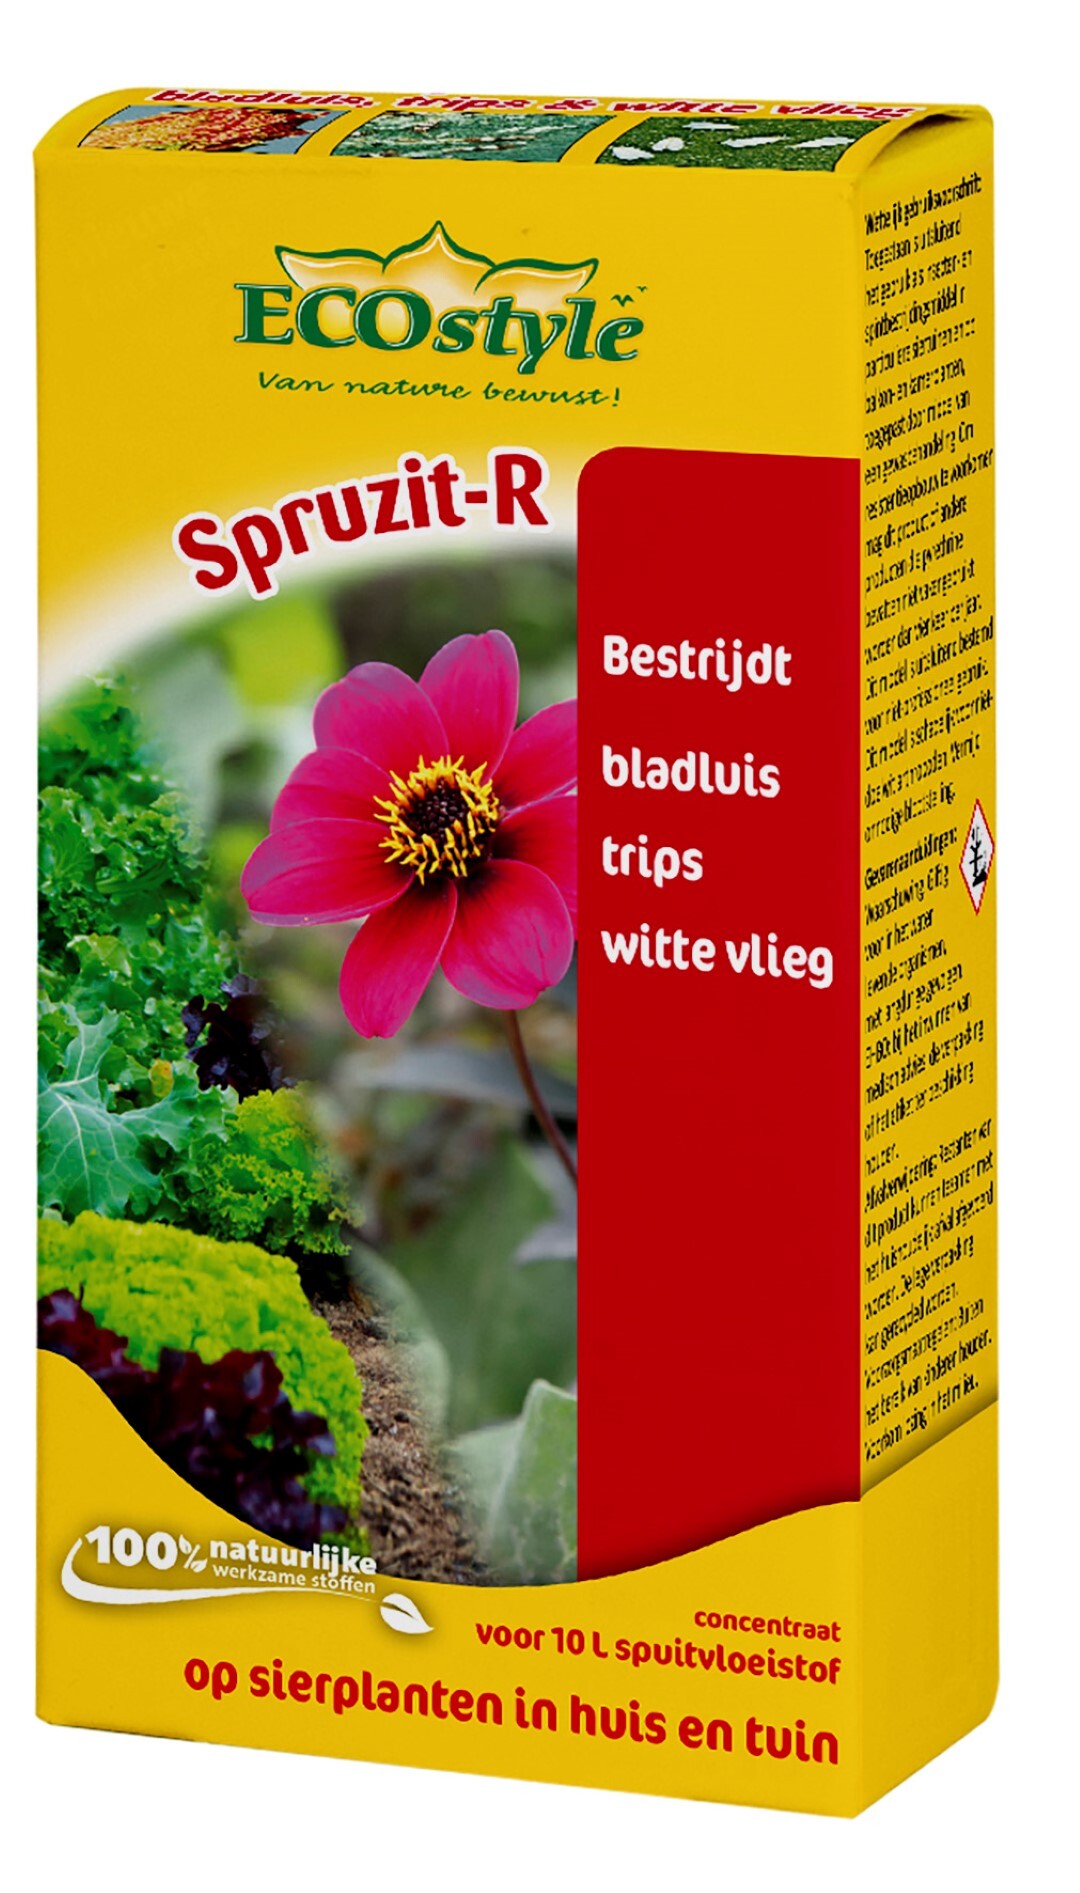 ECOSTYLE Spruzit R concentraat 100 ml